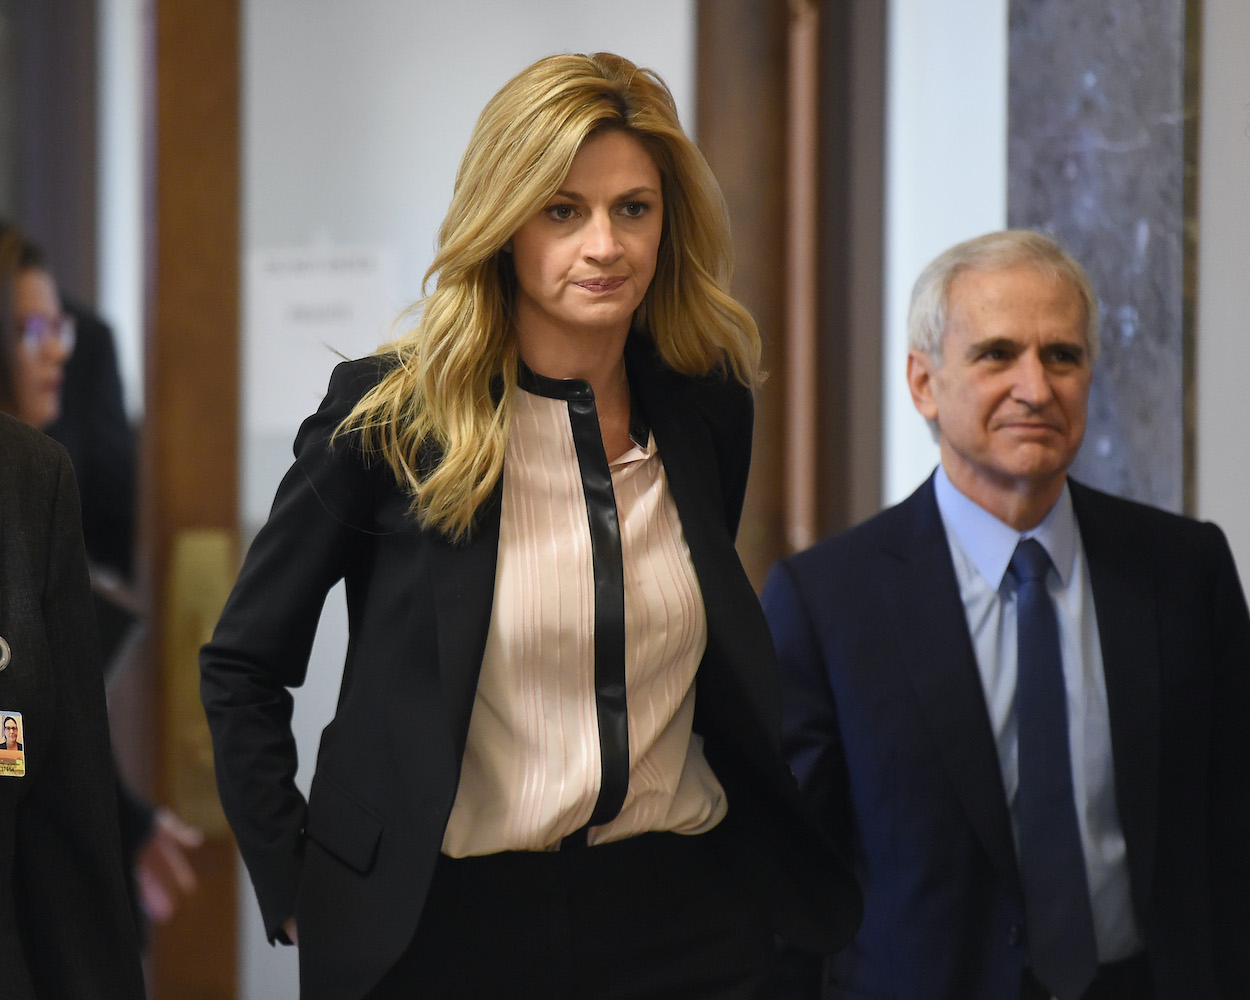 Sportscaster Erin Andrews was secretly filmed nude in 2008, but she was later awarded $55 million for her most scarring nightmare.